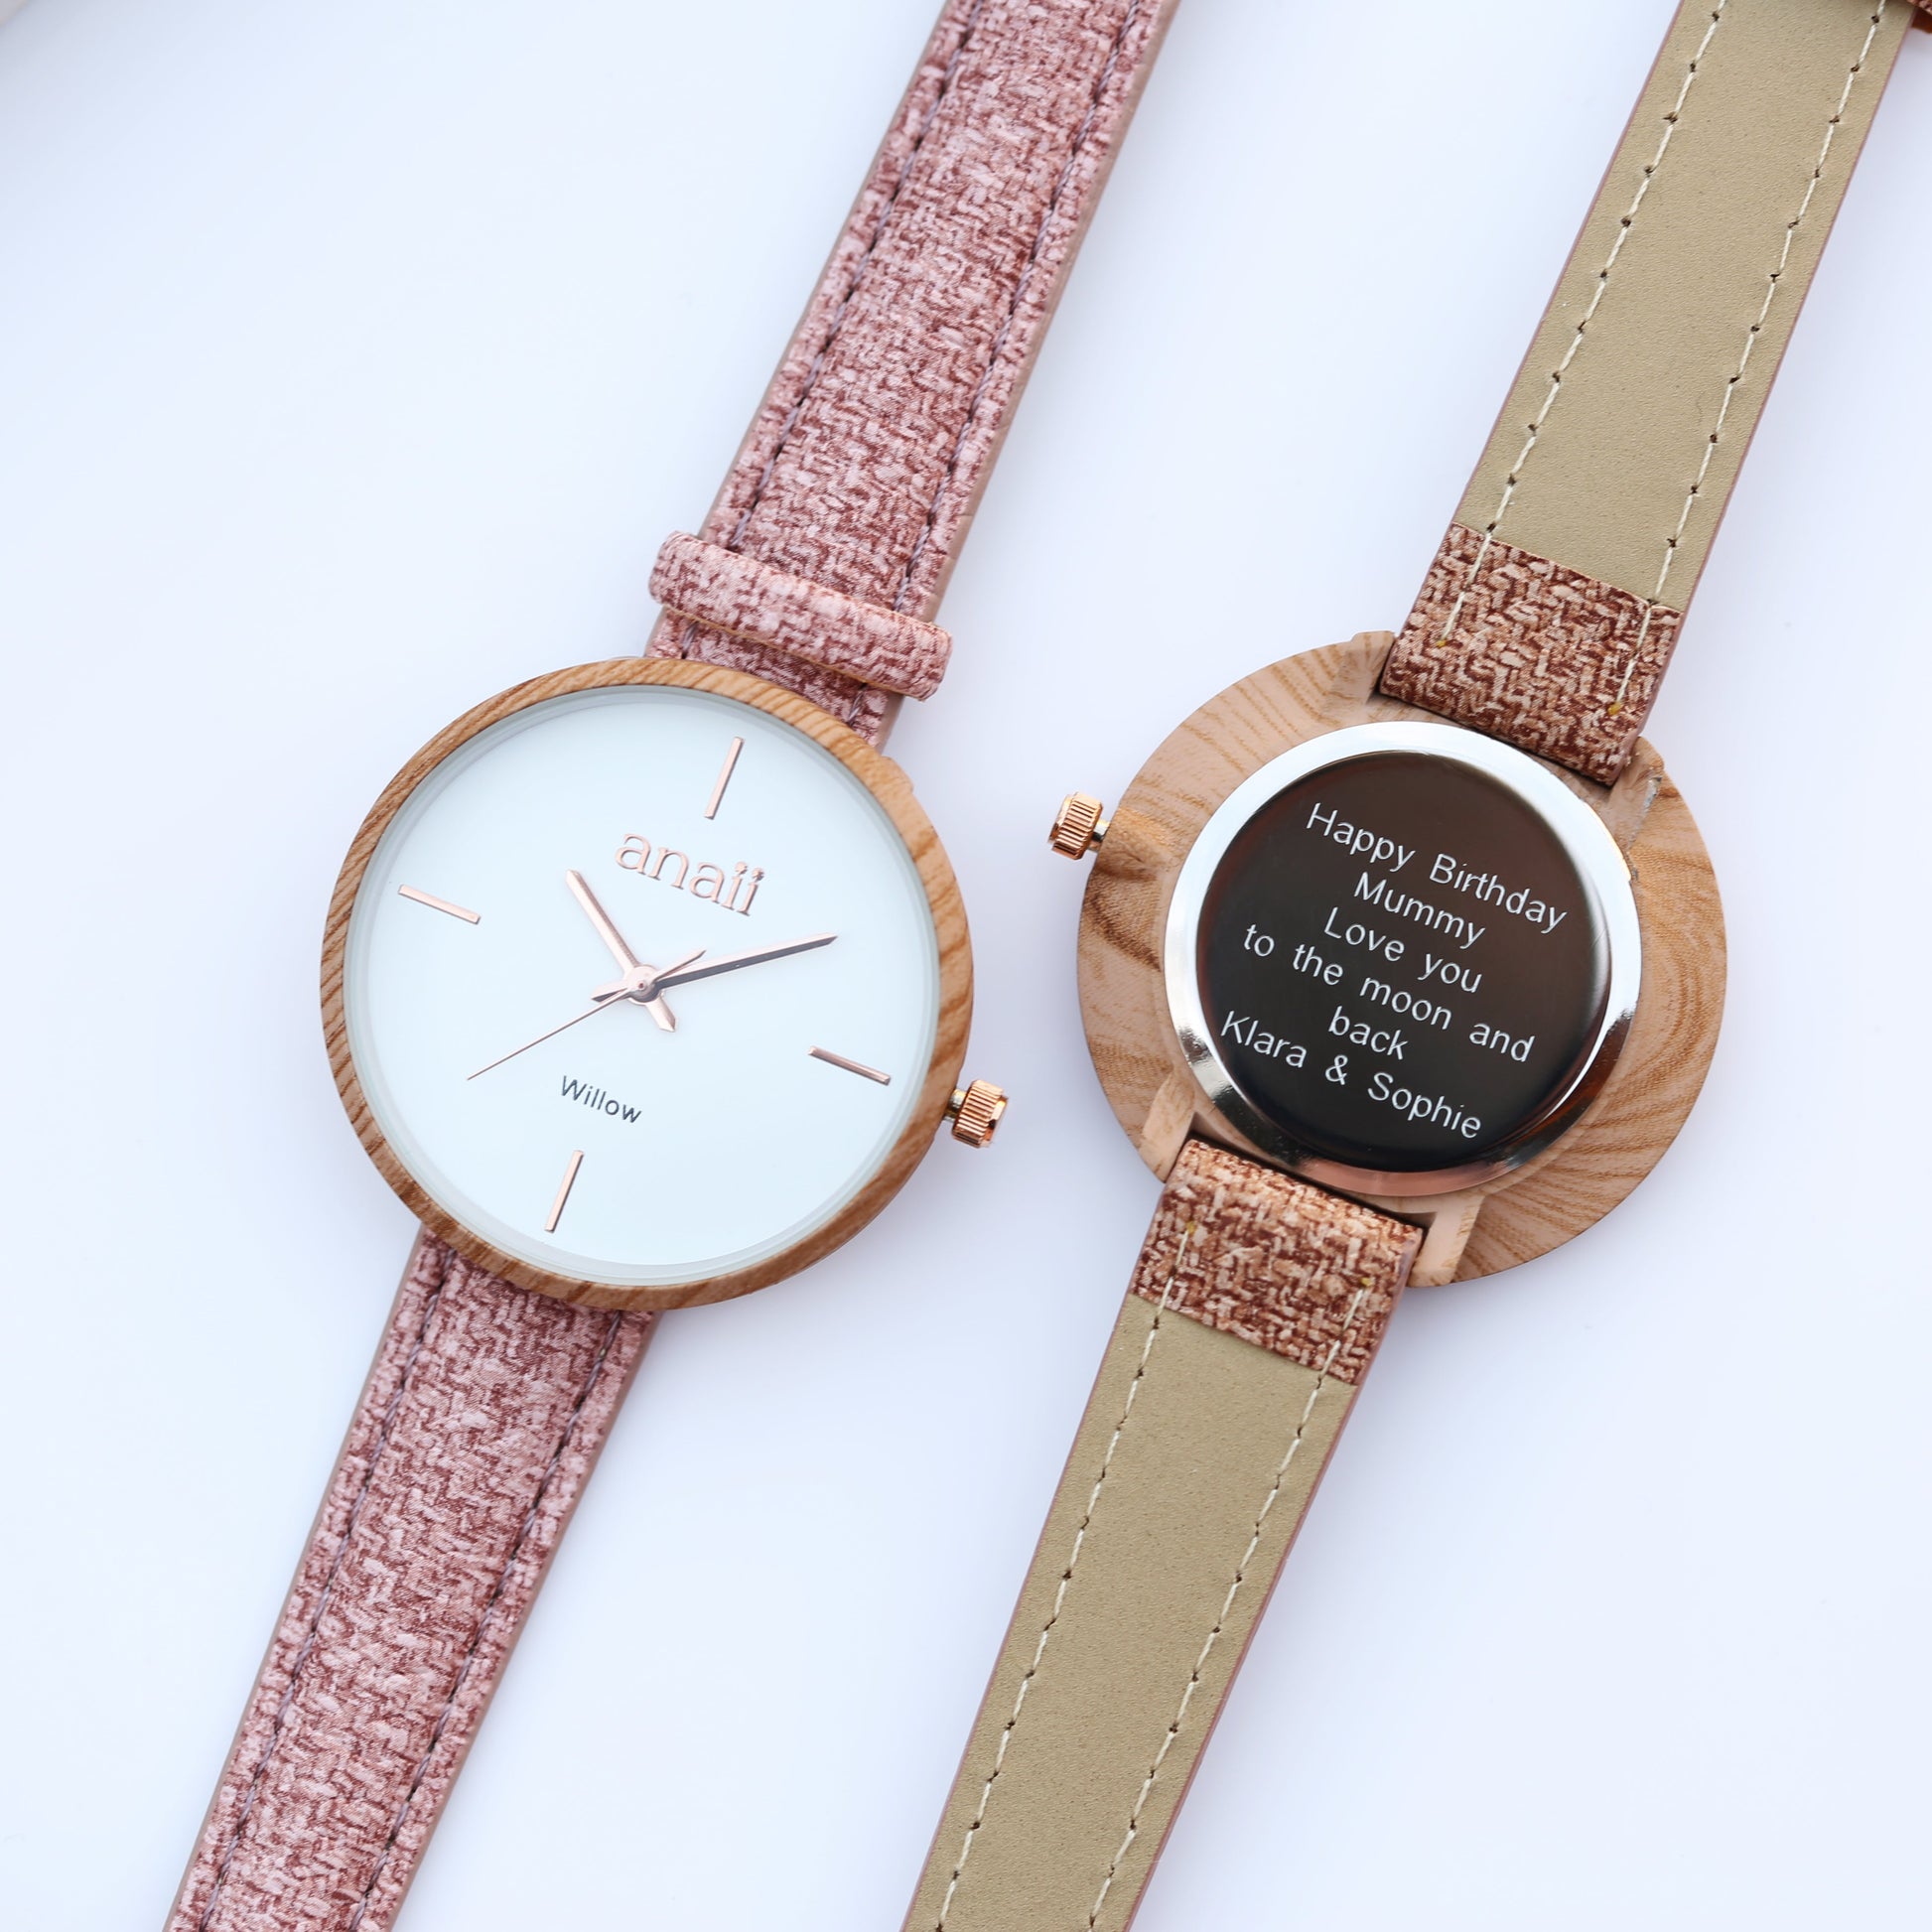 Personalized Ladies' Watches - Personalized Watch In Sweet Pink 